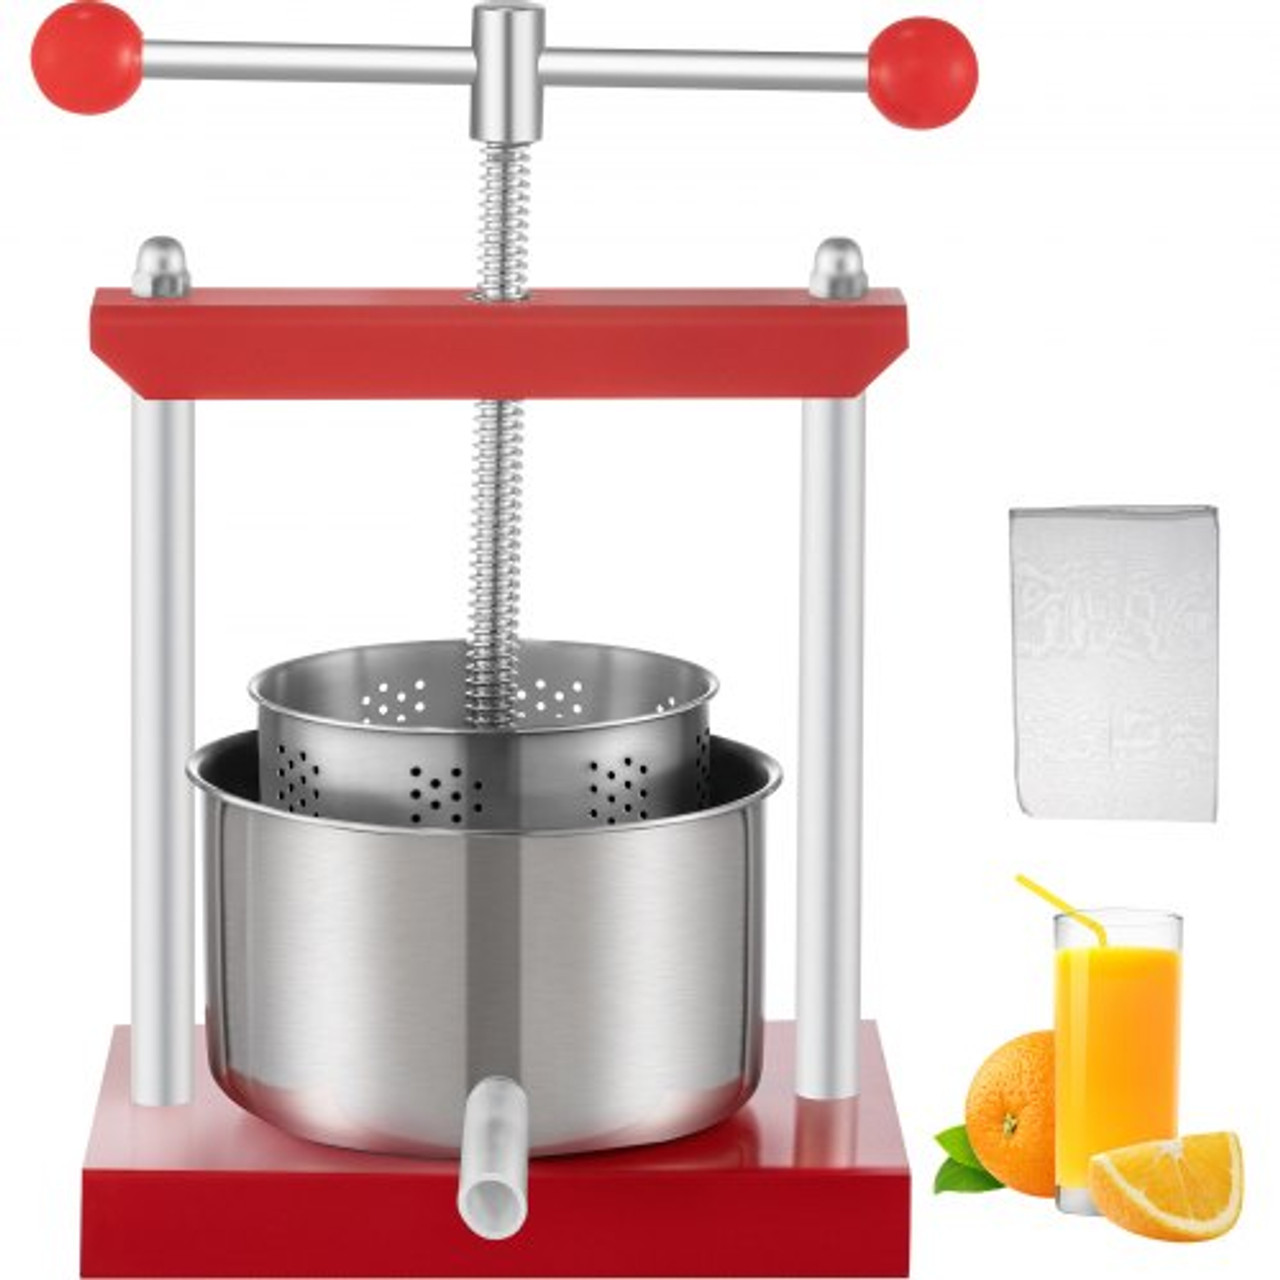 Fruit Wine Press, 0.9Gal/3.5L Grape Press for Wine Making, Wine Press Machine with 2 Stainless Steel Barrels, Wine Cheese Fruit Vegetable Tincture Press with T-Handle and 0.1"/3mm Thick Plate